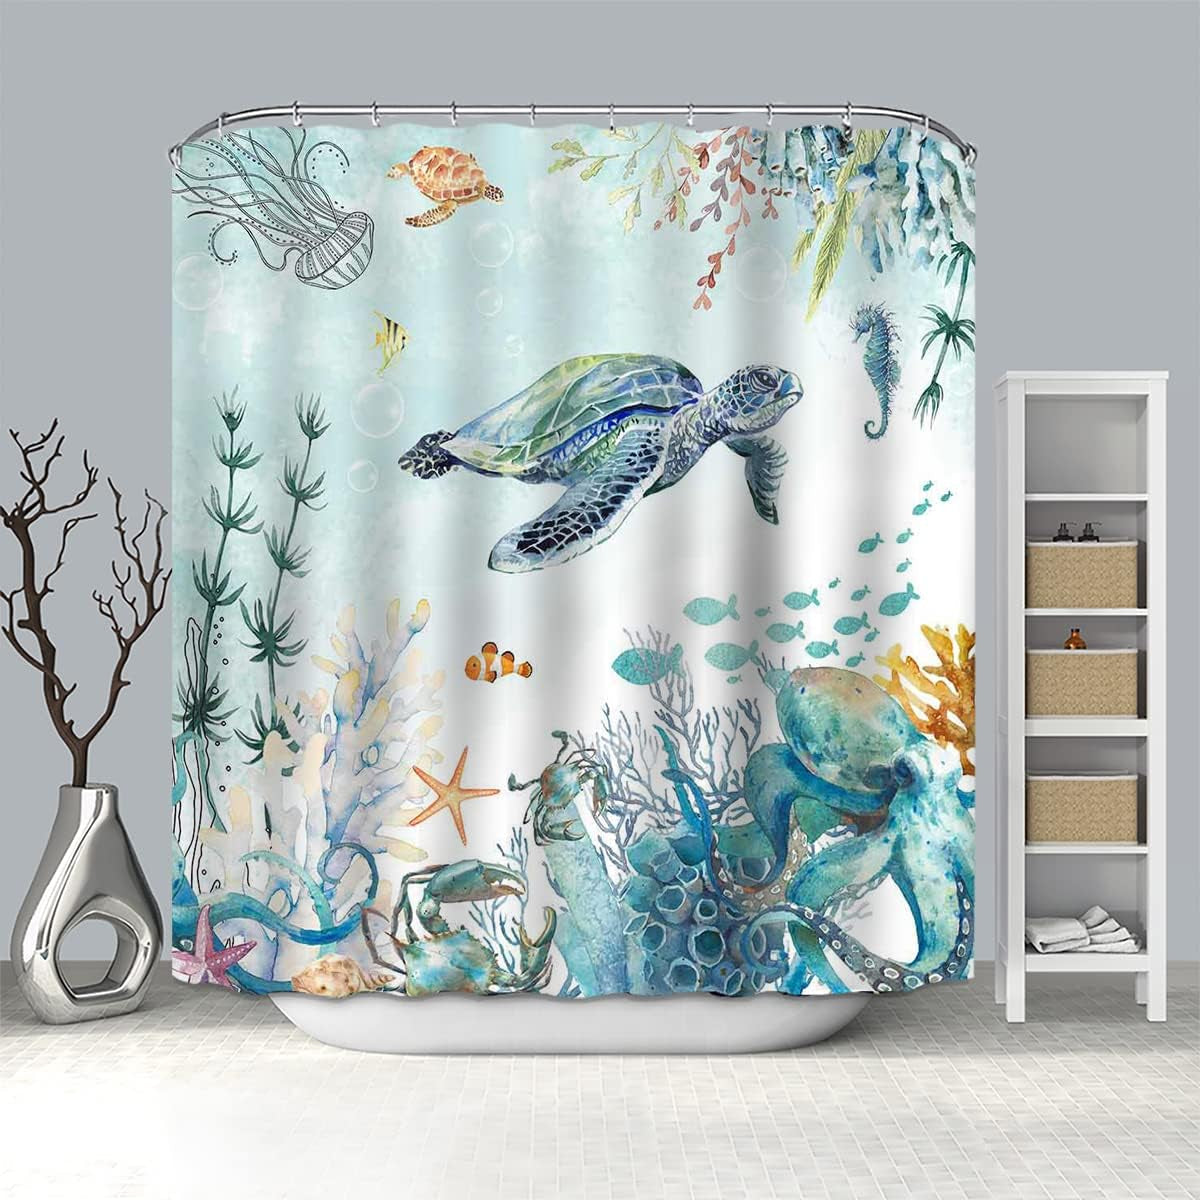 Mocsicka Sea Turtle Shower Curtain Ocean Animals Shower Curtain for Bathroom Underwater Coral Octopus Shower Curtain Set with 12 Hooks, 72X72 Inches